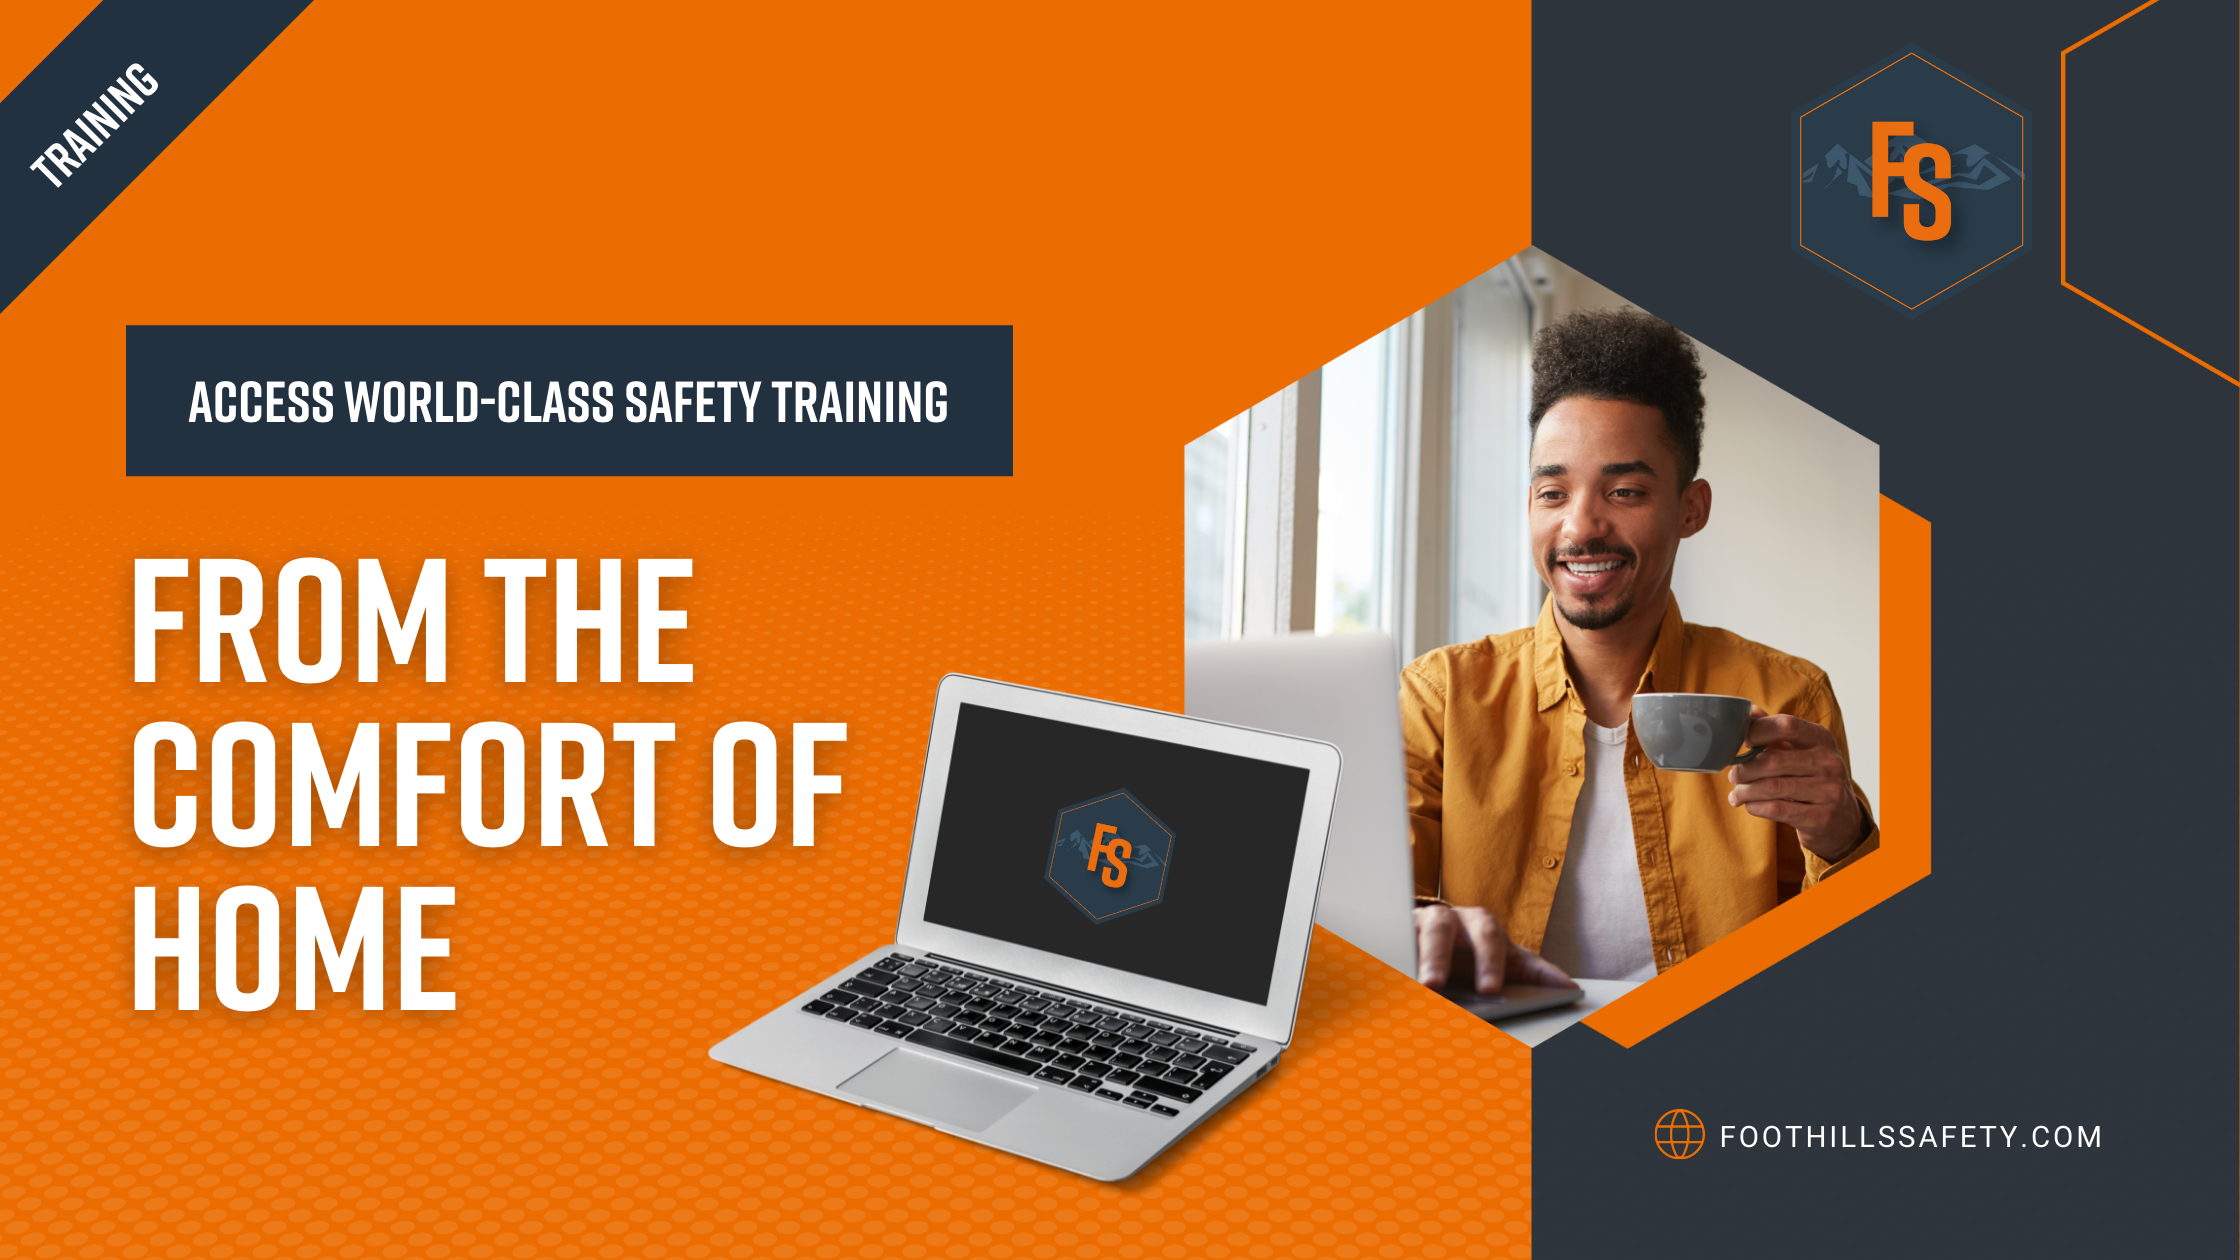 Access World Class Safety Training From The Comfort of Home